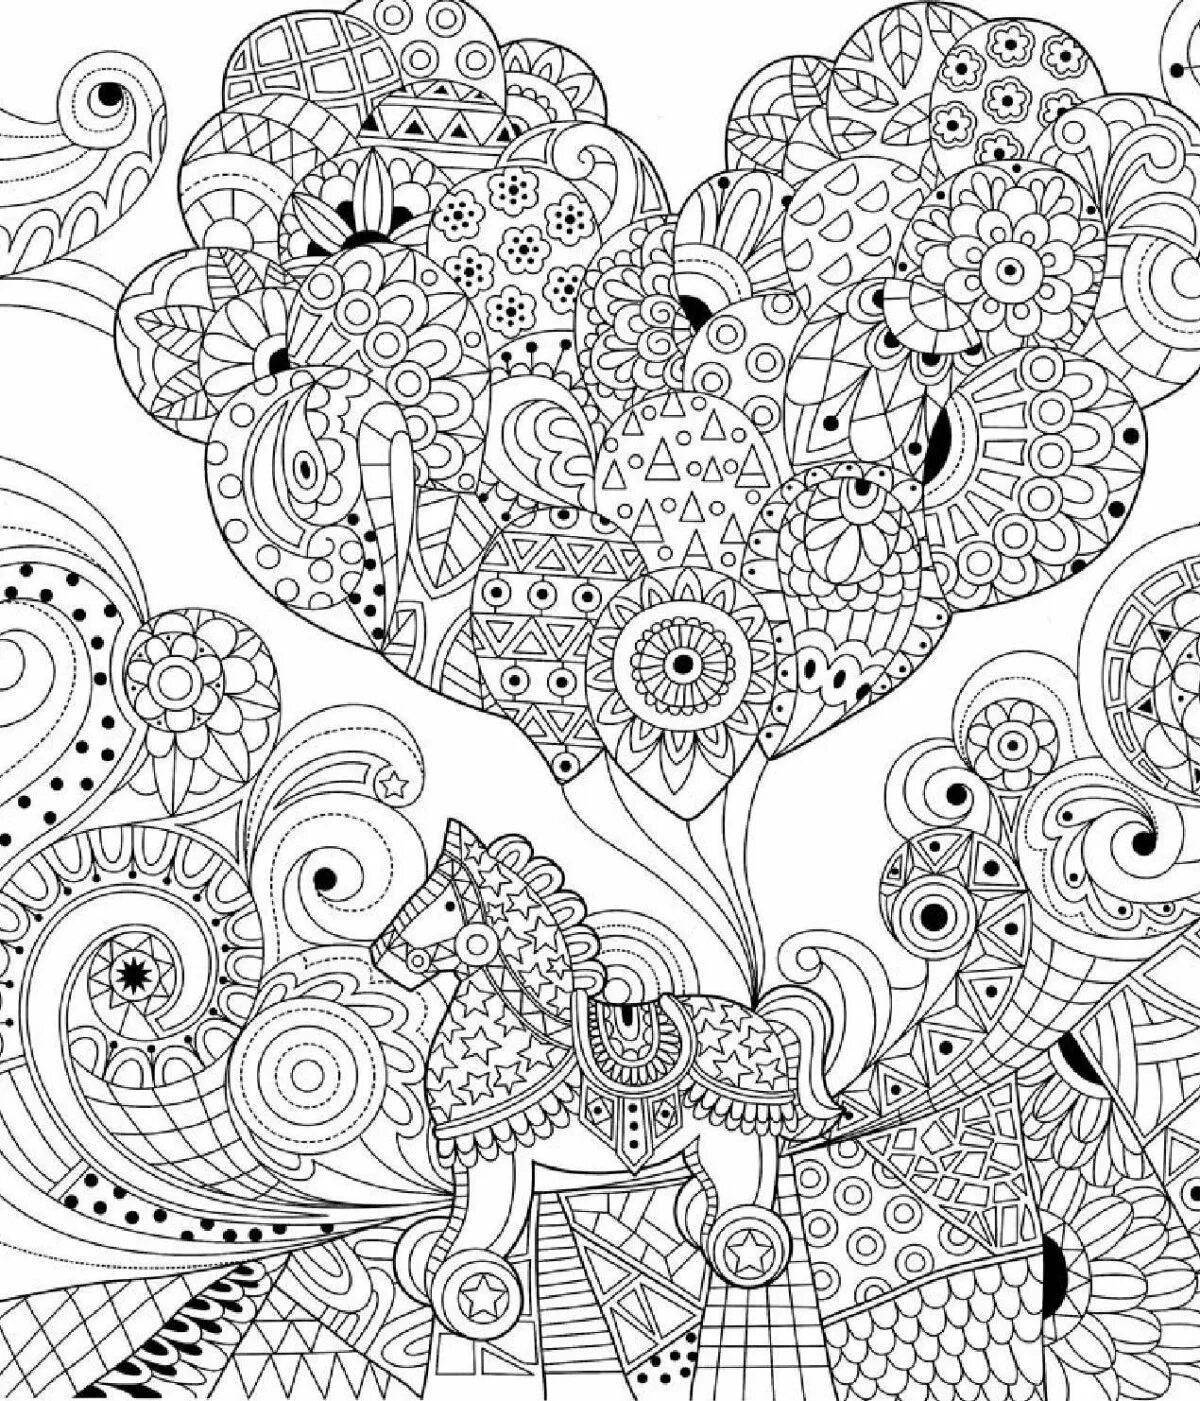 Modern art coloring for adults